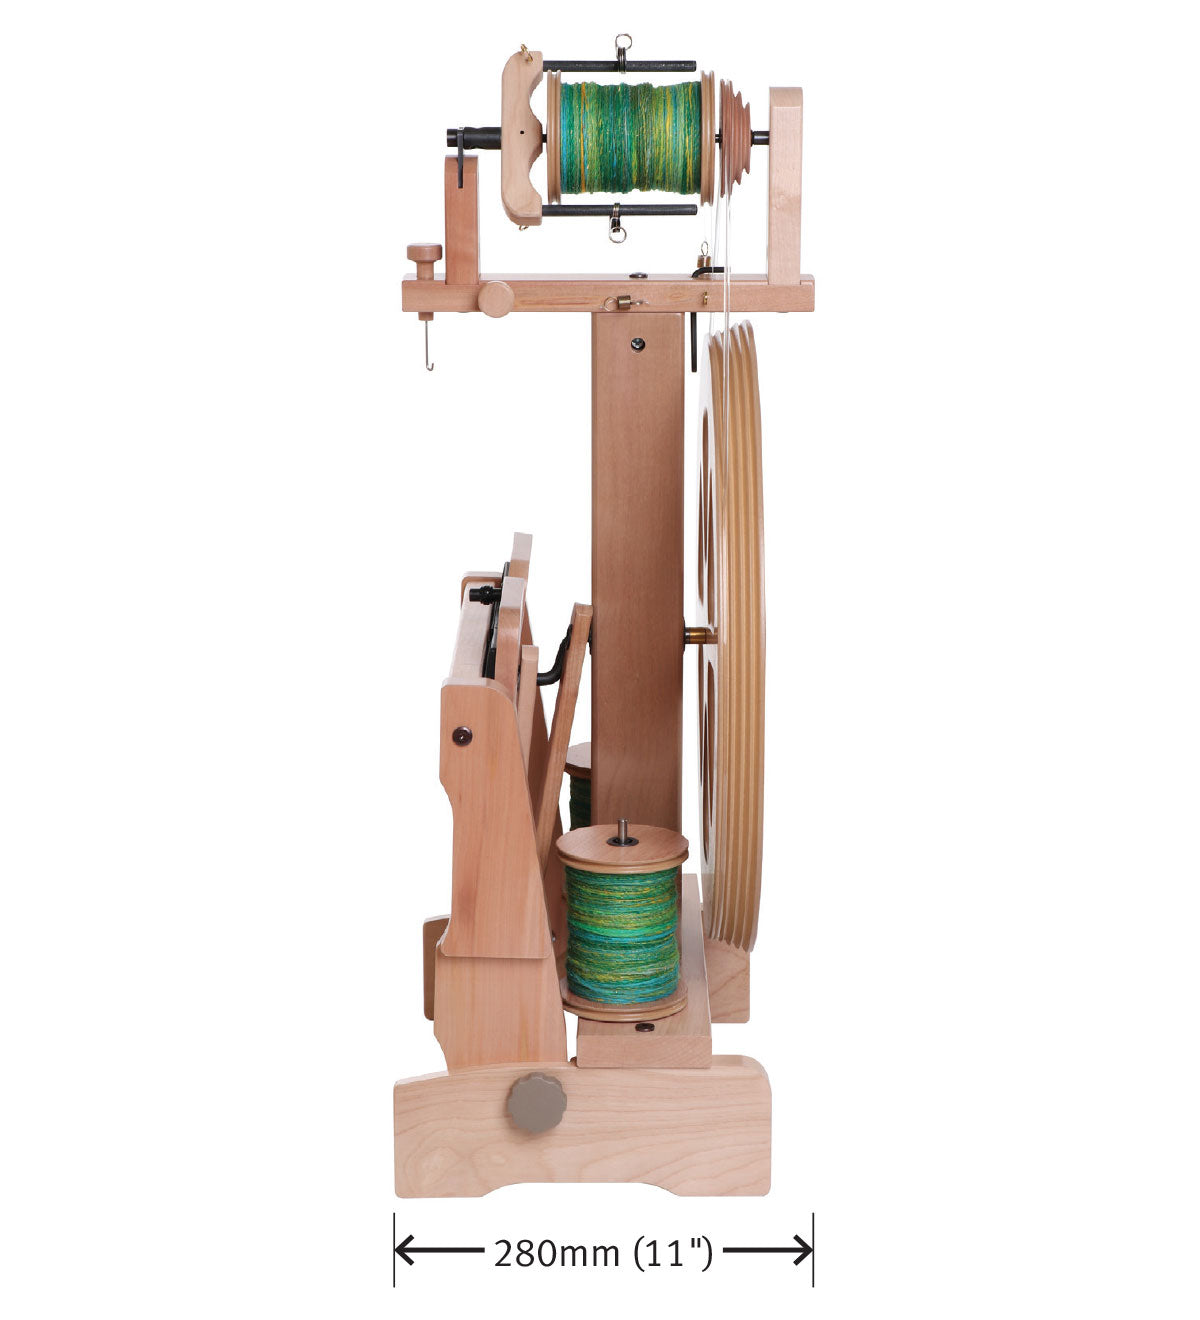 Kiwi 3 Spinning Wheel (Pre Order Only)